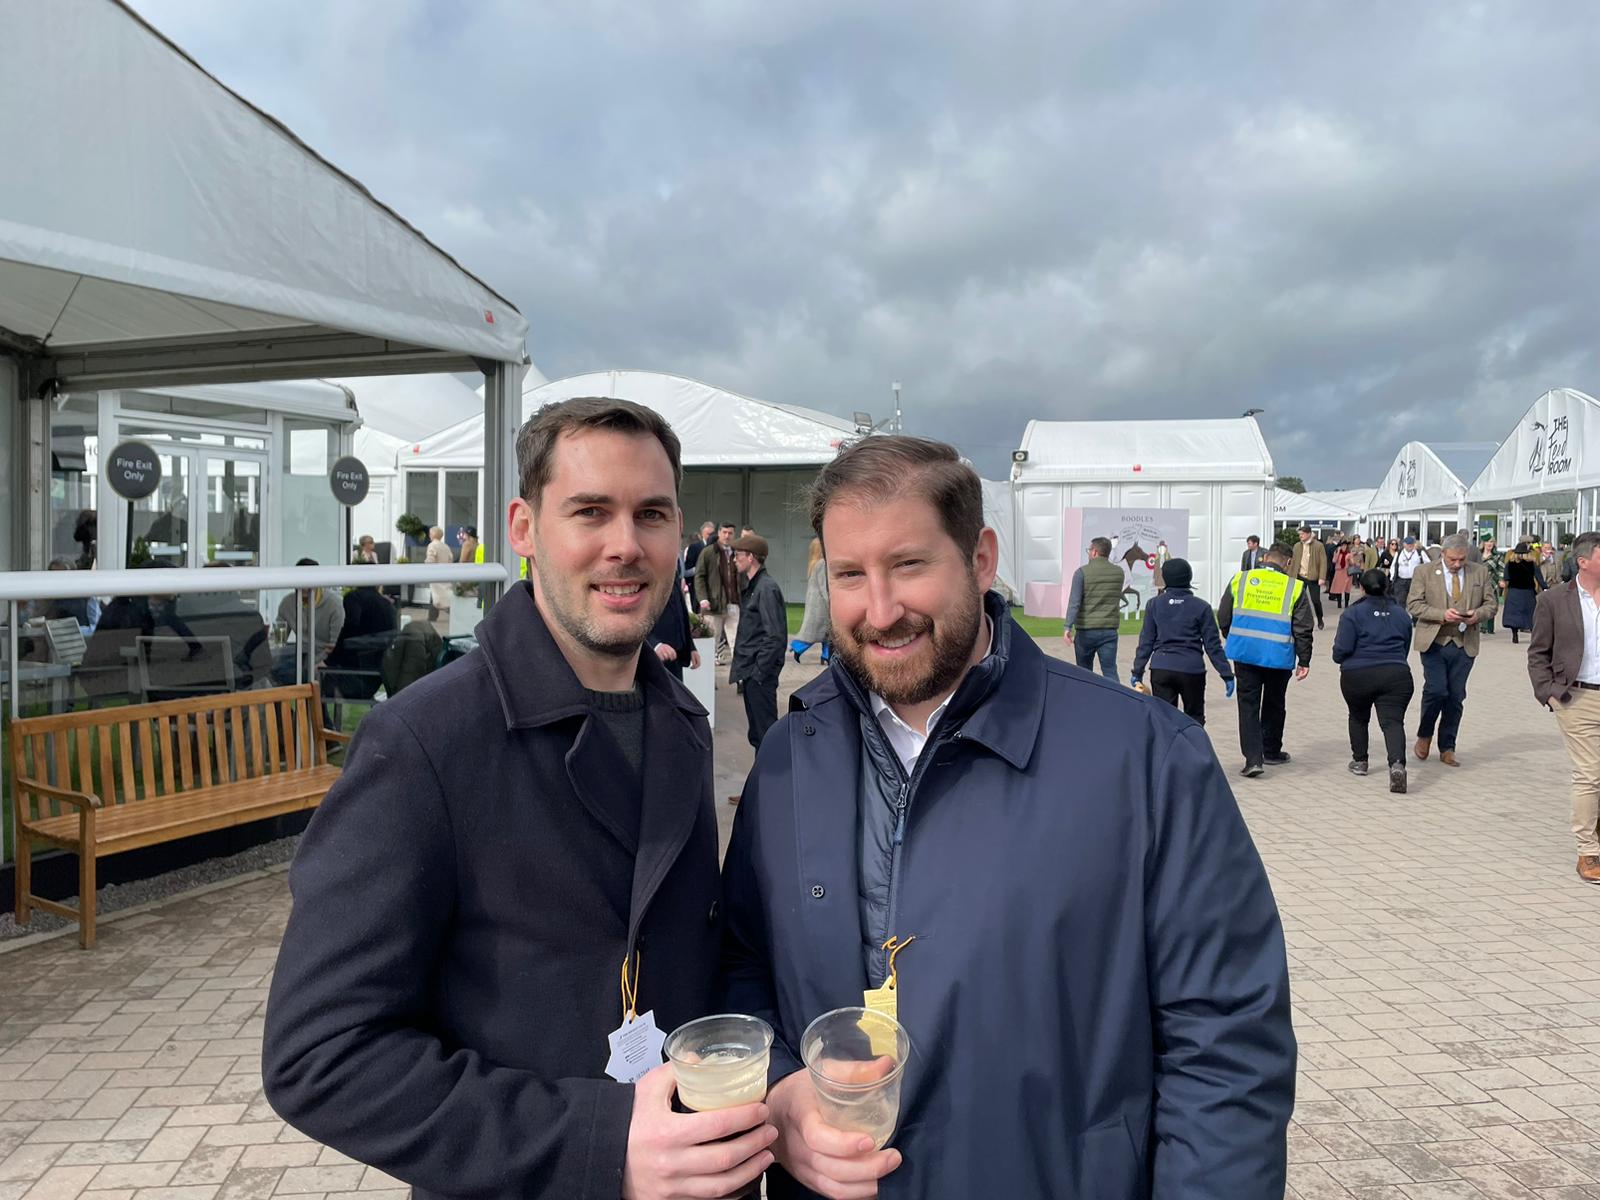 Cut-price entry: Nick Madden and Dave Hartley got tickets priced £175 for the Gold Cup at £85 from a friend who couldn’t go